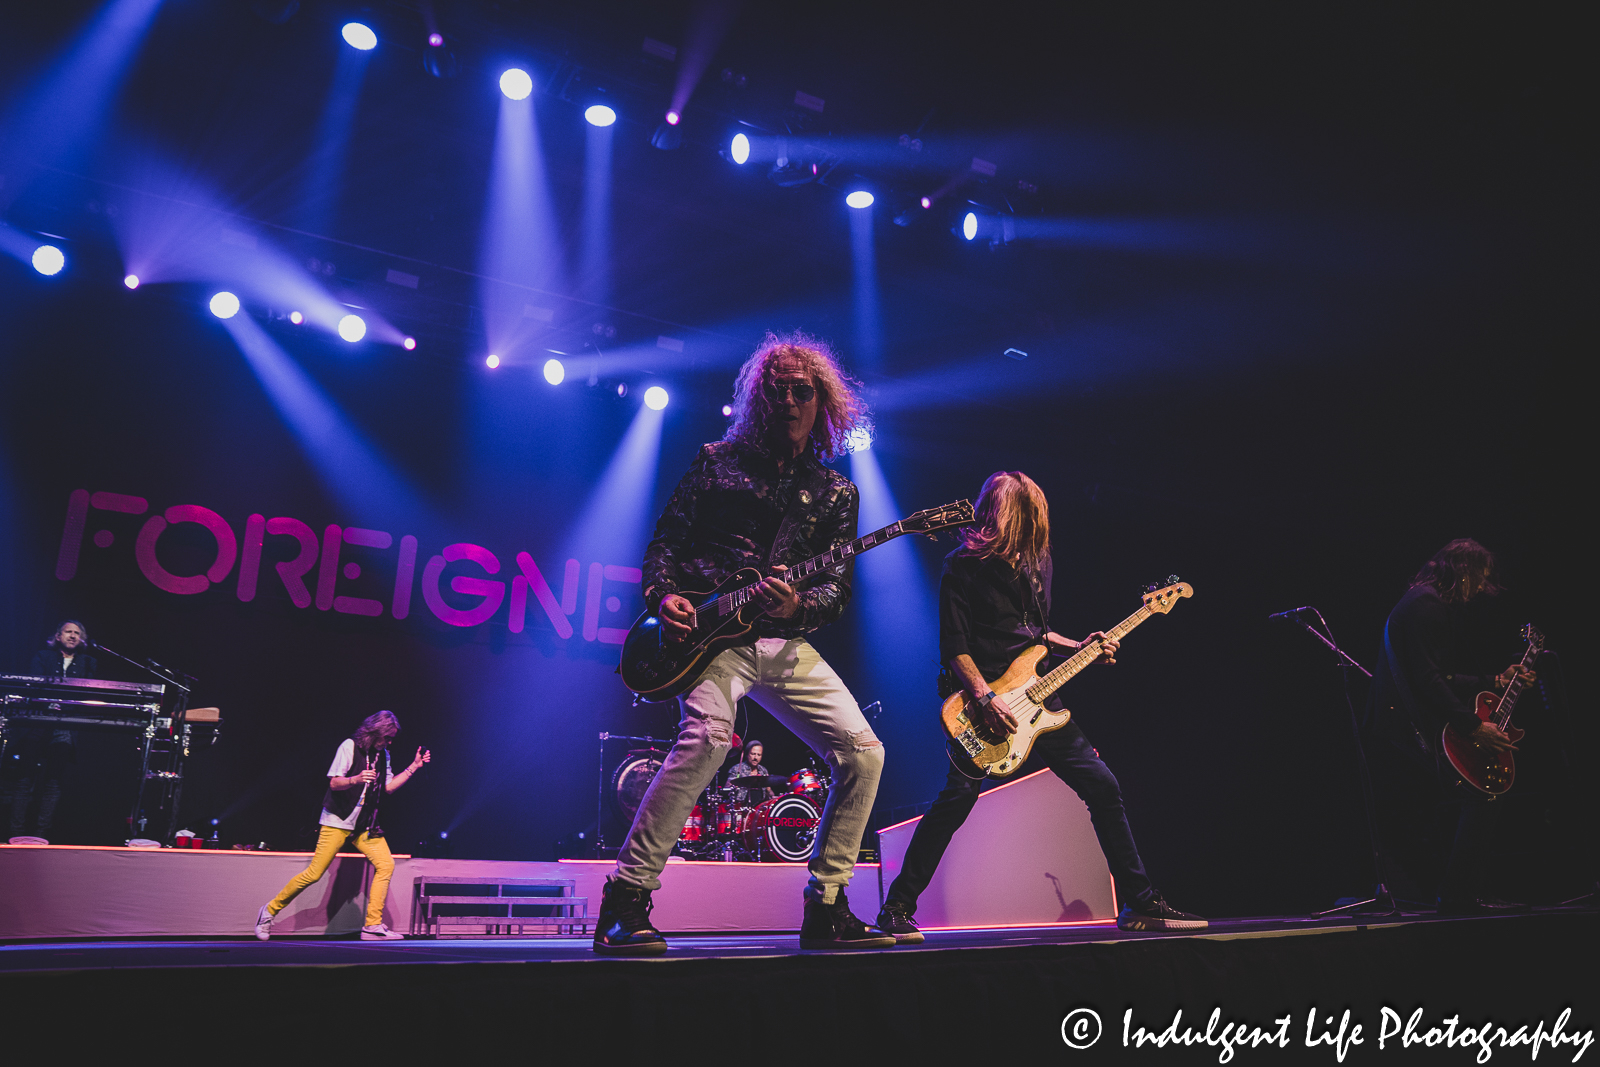 Foreigner performing "Head Games" live in concert at Landon Arena inside of Stormont Vail Events Center in Topeka, KS on May 2, 2023.